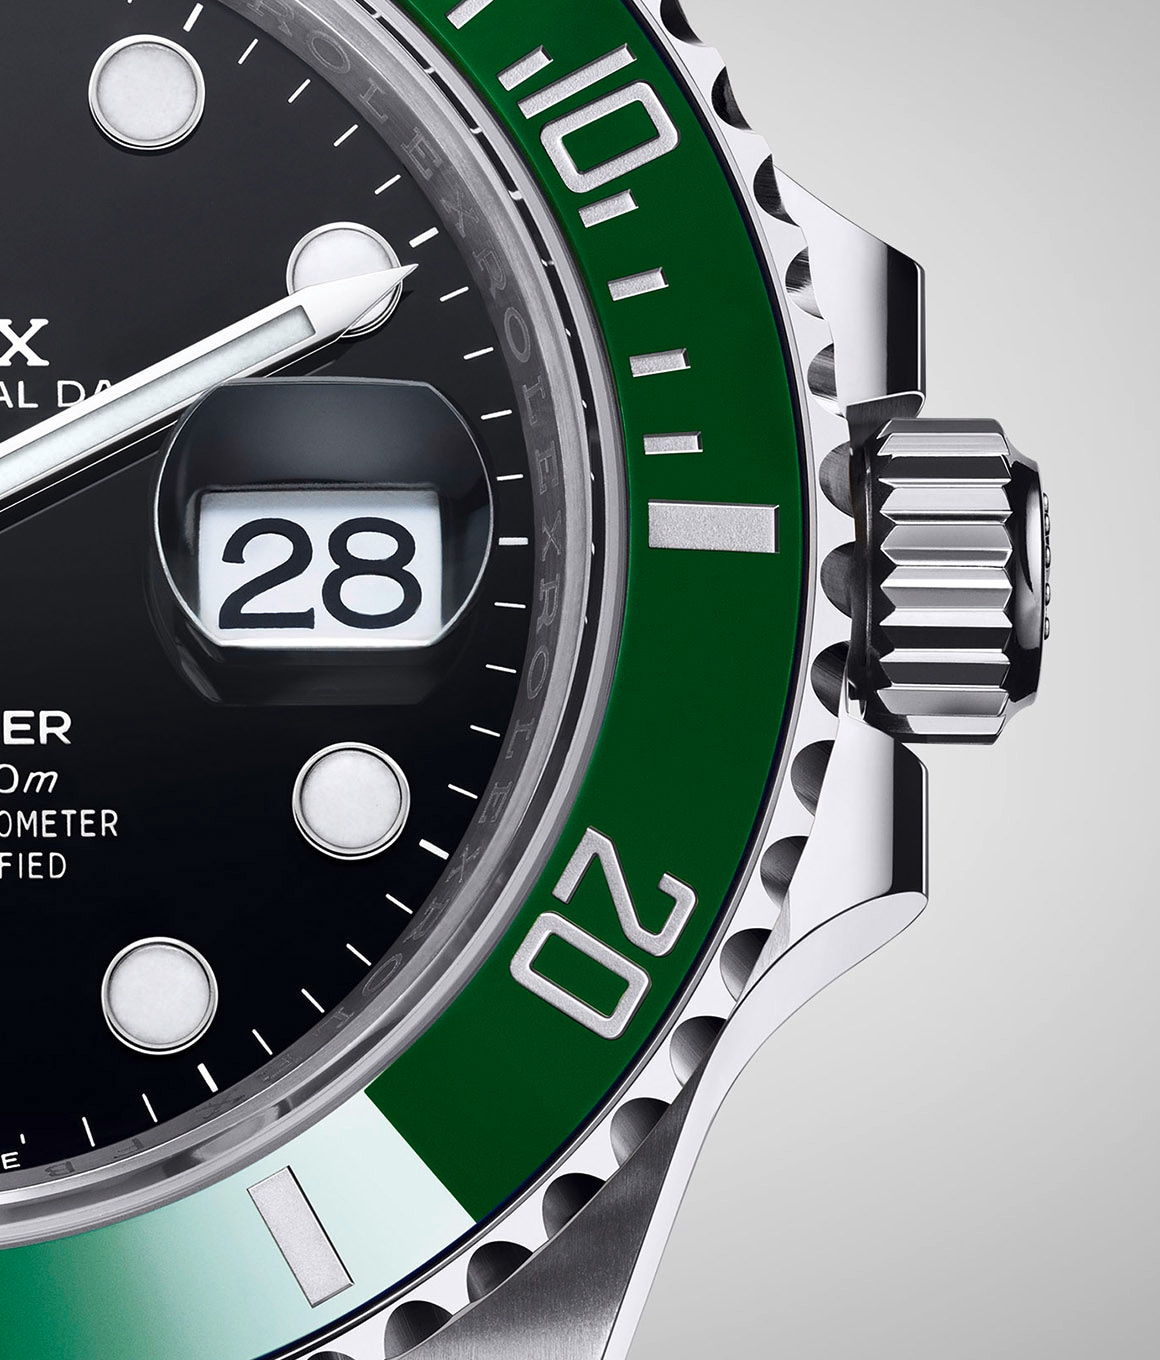 Rolex SUBMARINER 1680 SELF-WINDING AUTOMATIC MOVEMENT WITH DATE